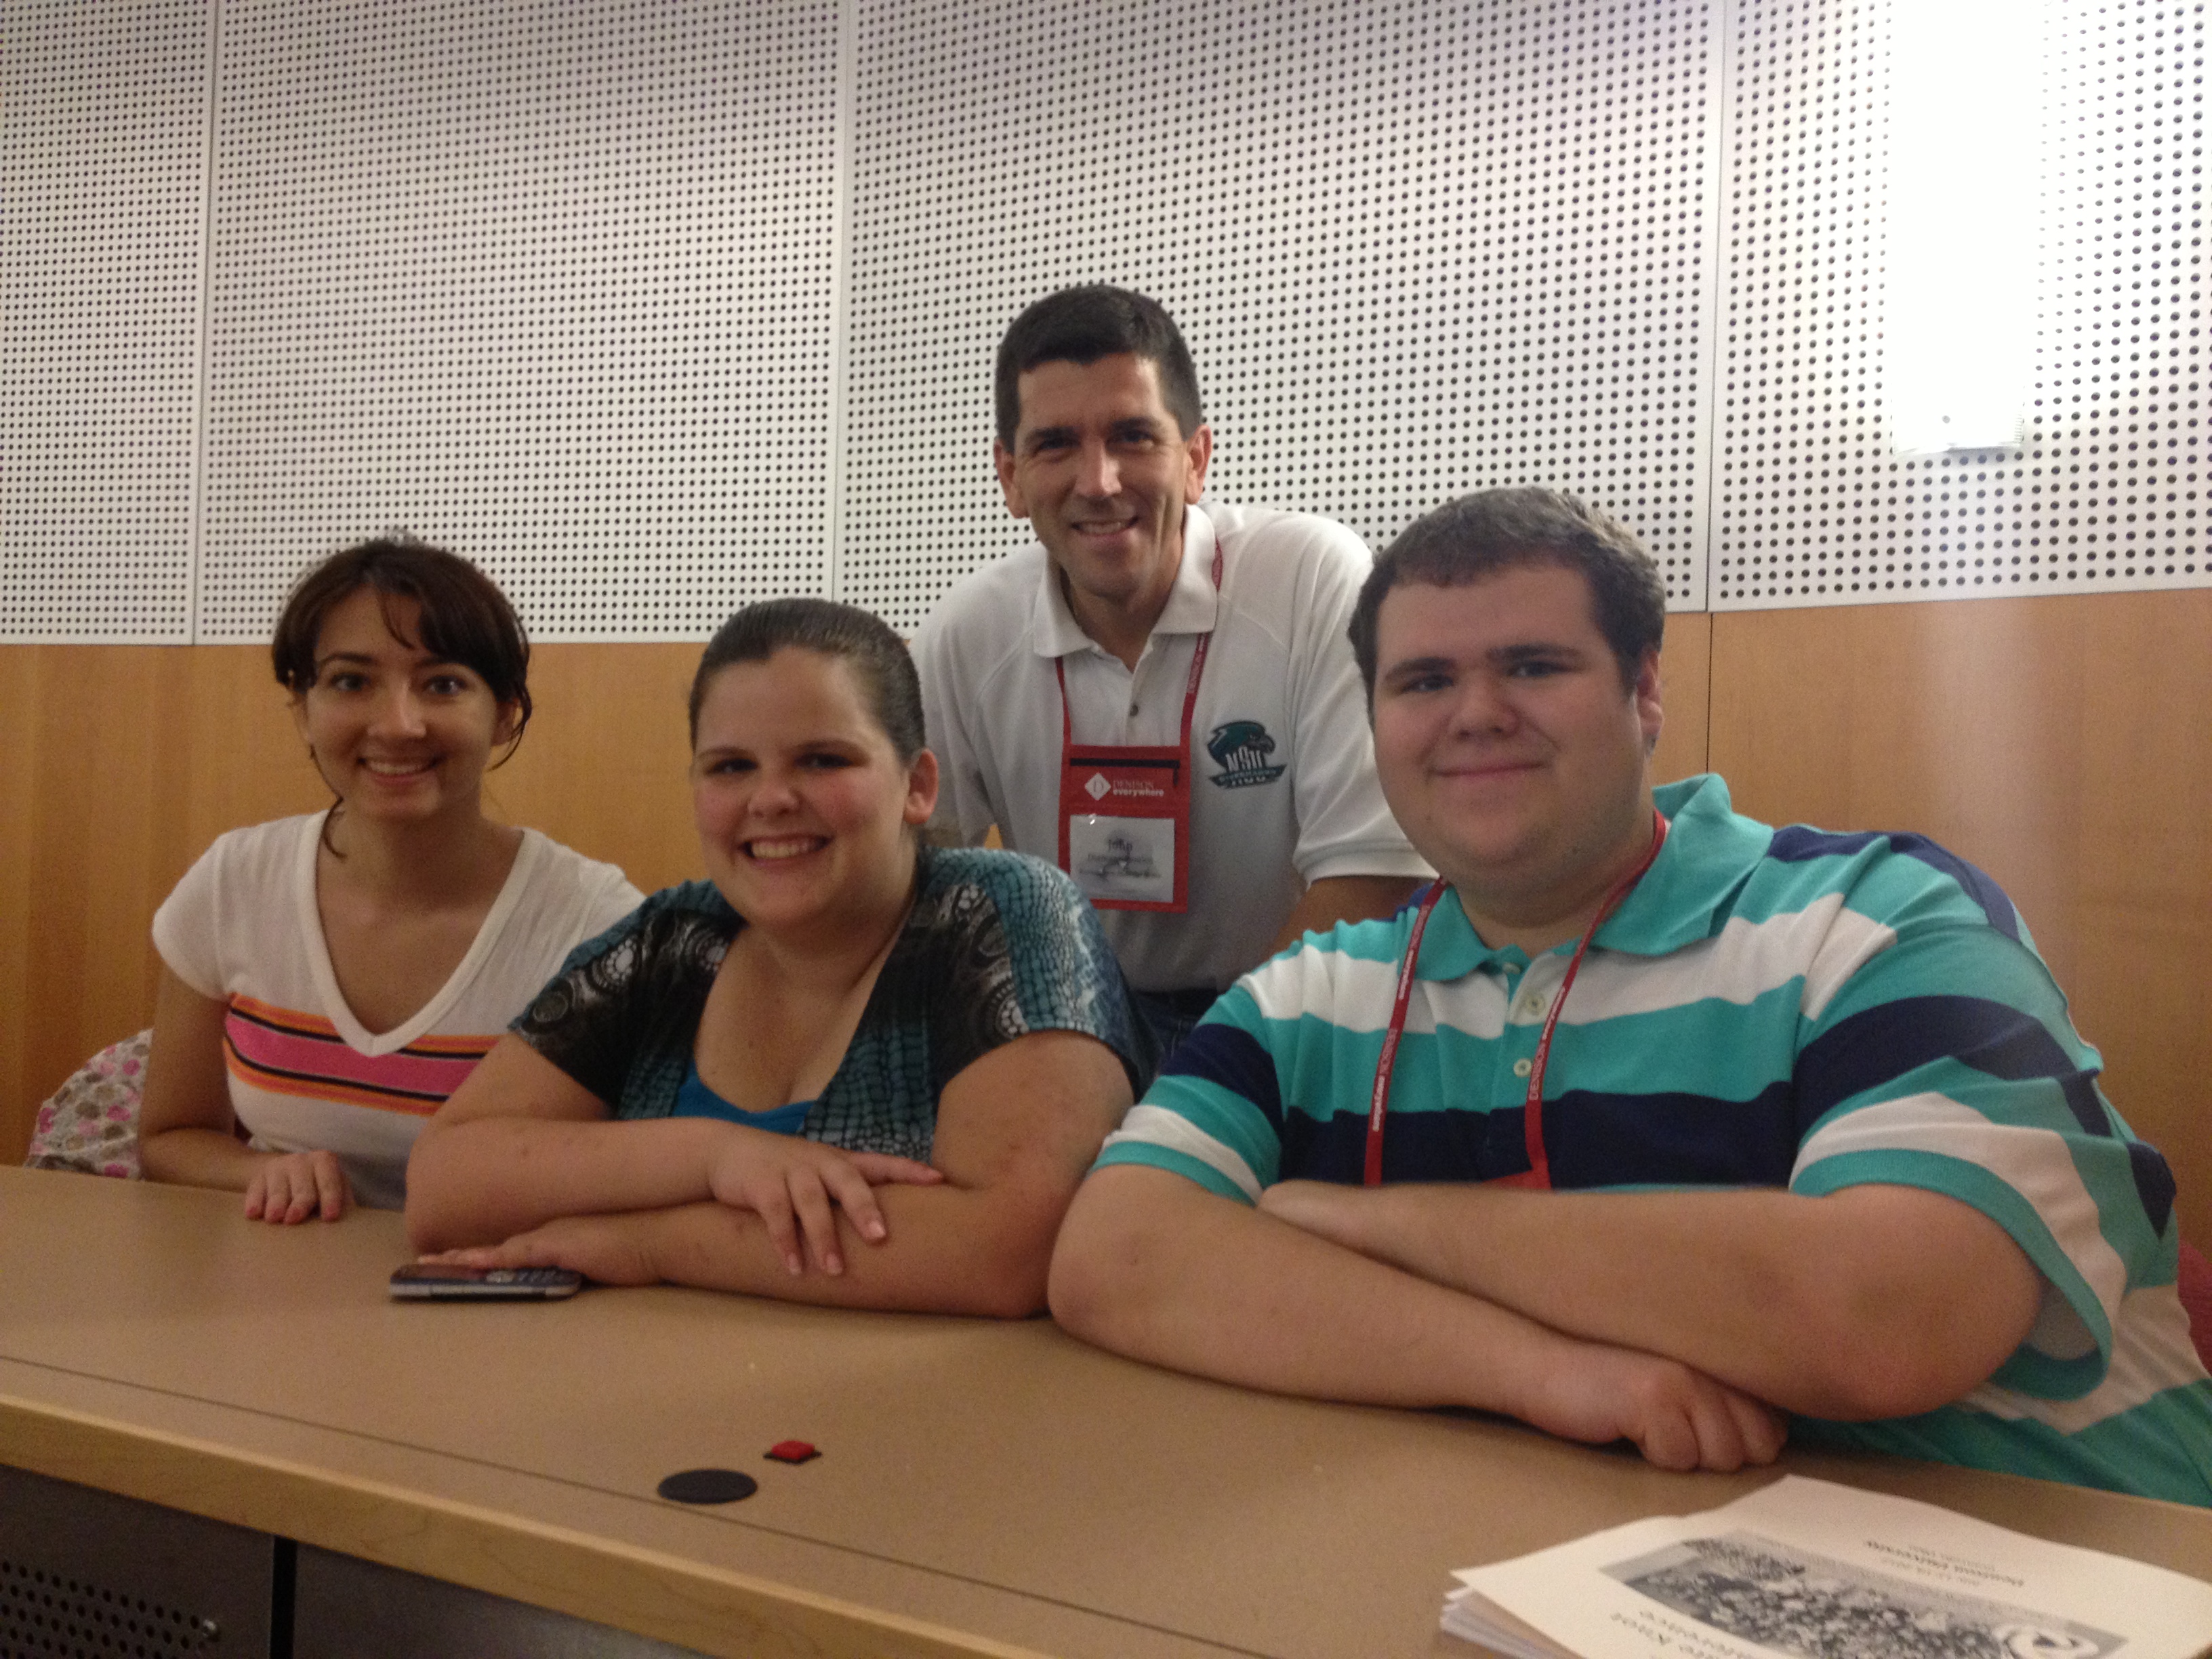 nsu math professor diamantopoulos and students attending conference at denison university